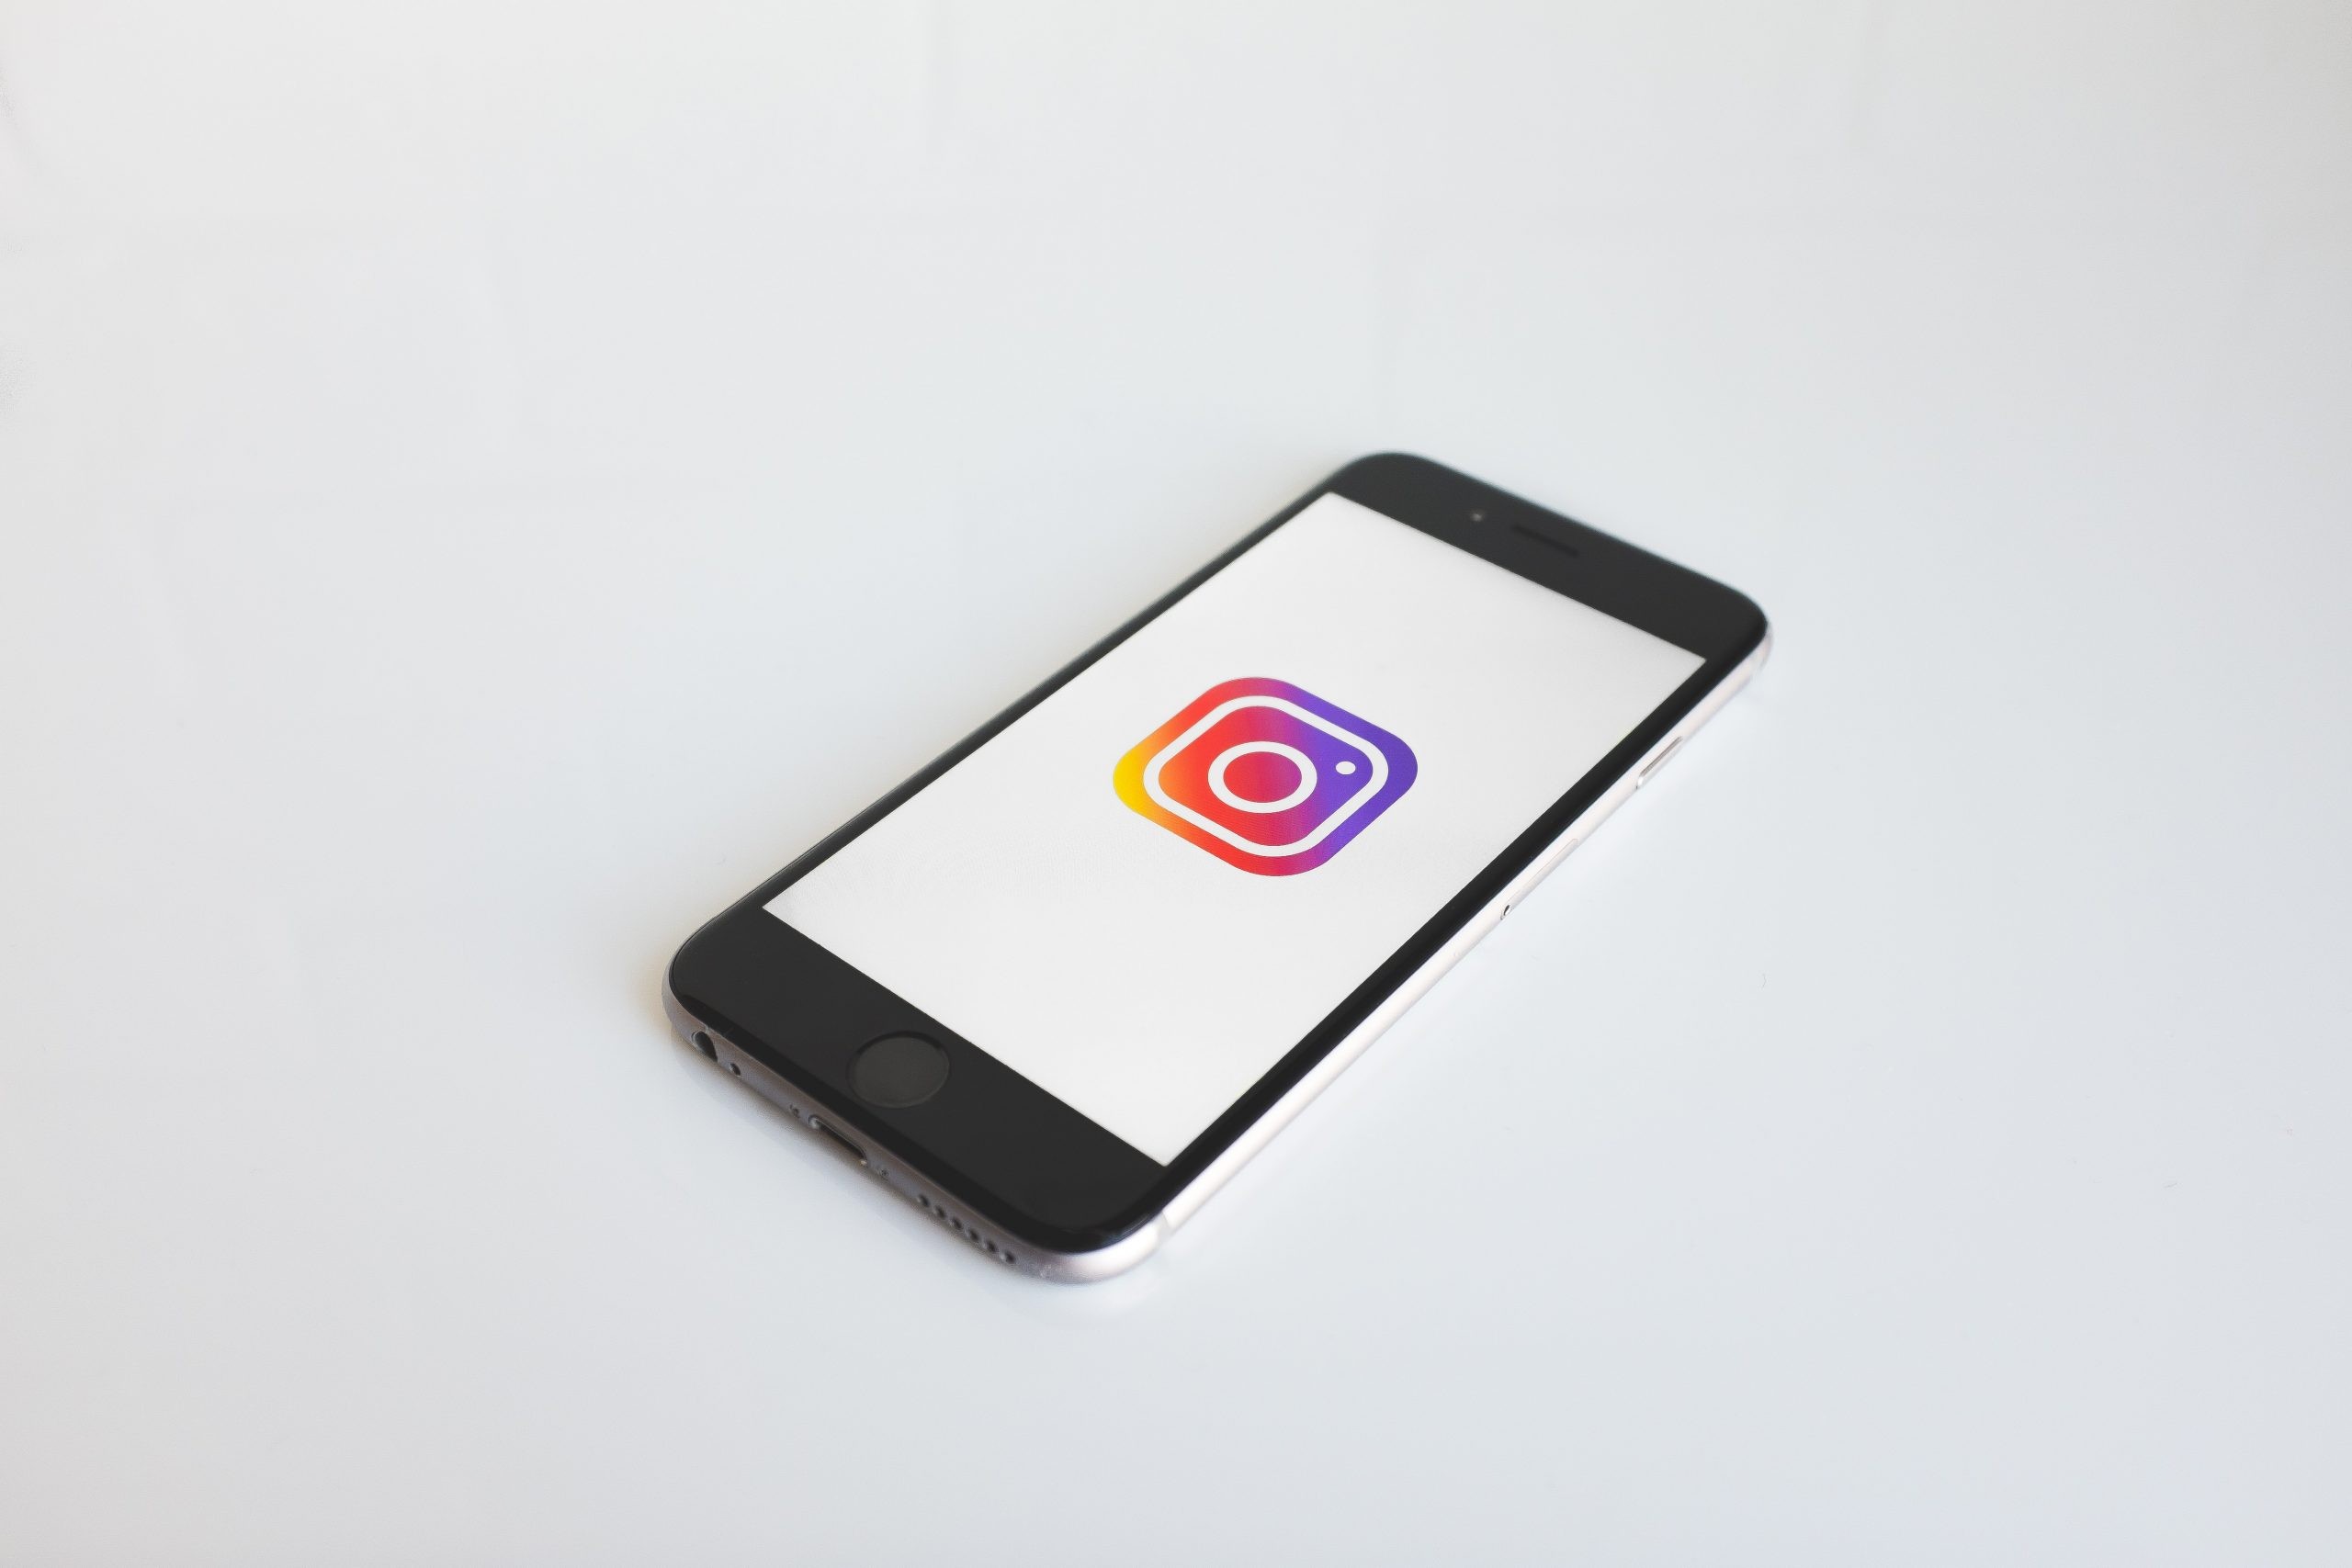 How to Get Your Instagram Account Back